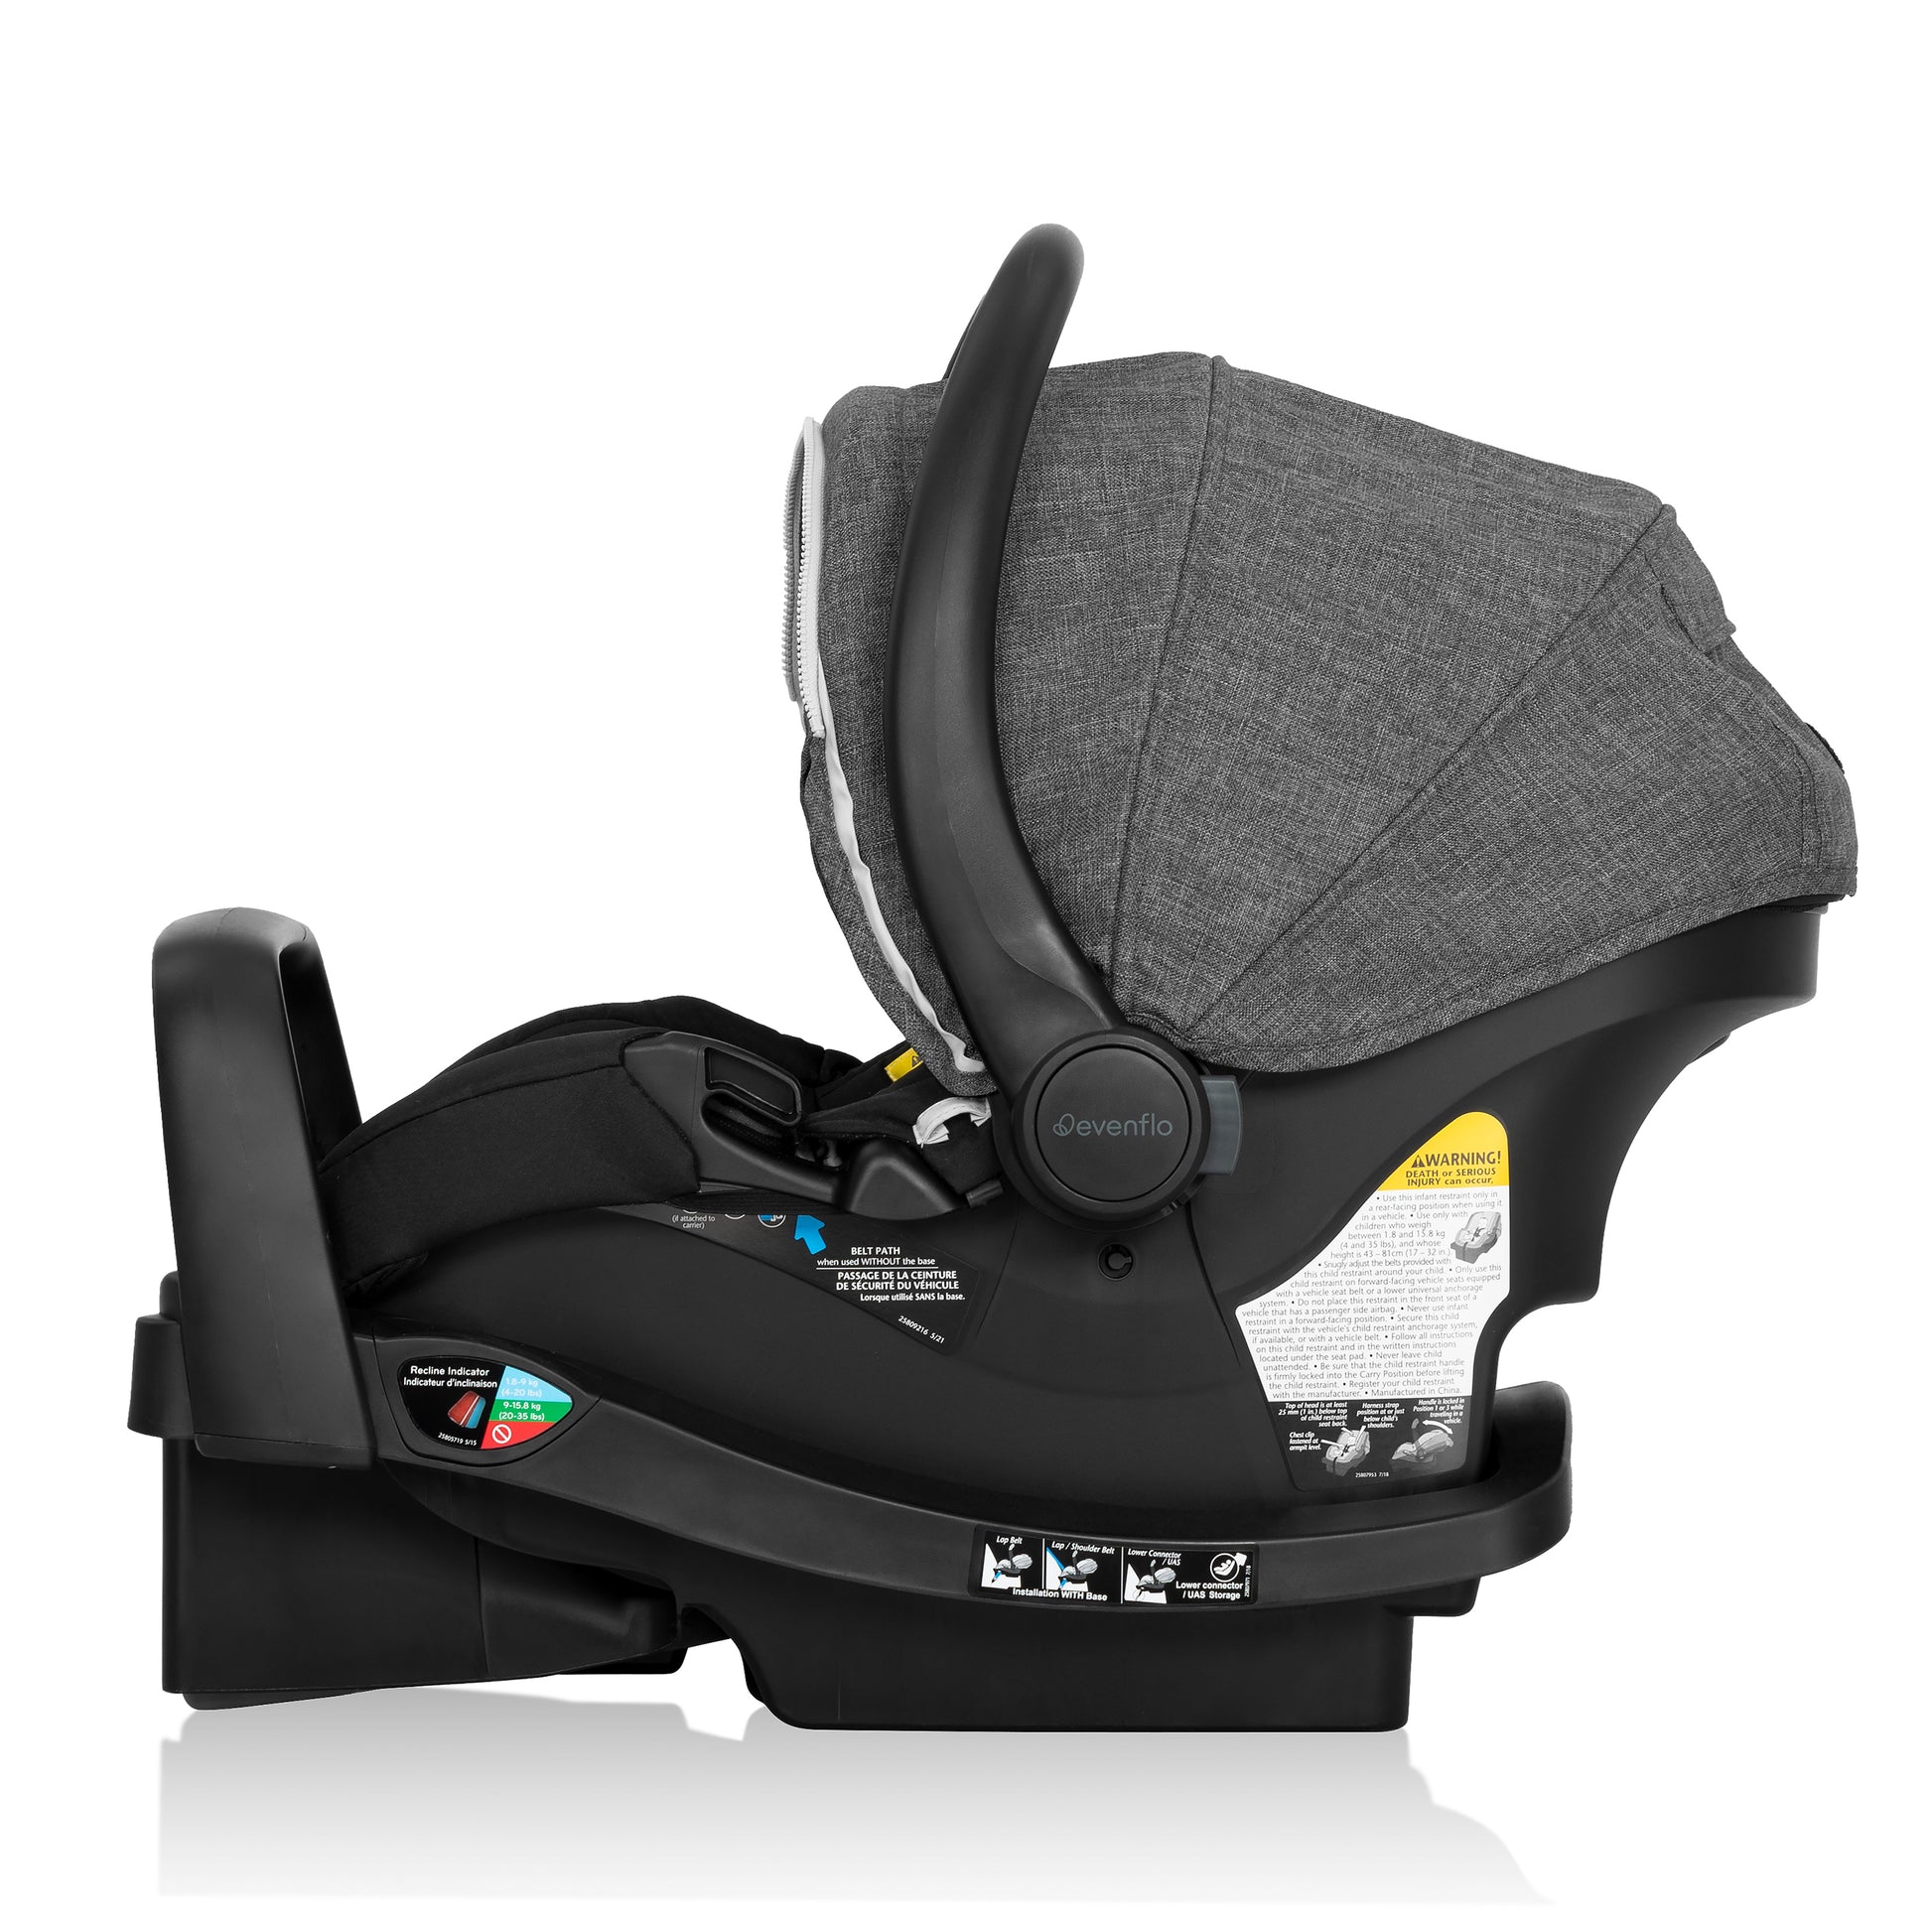 lv baby car seat covers,Save up to 15%